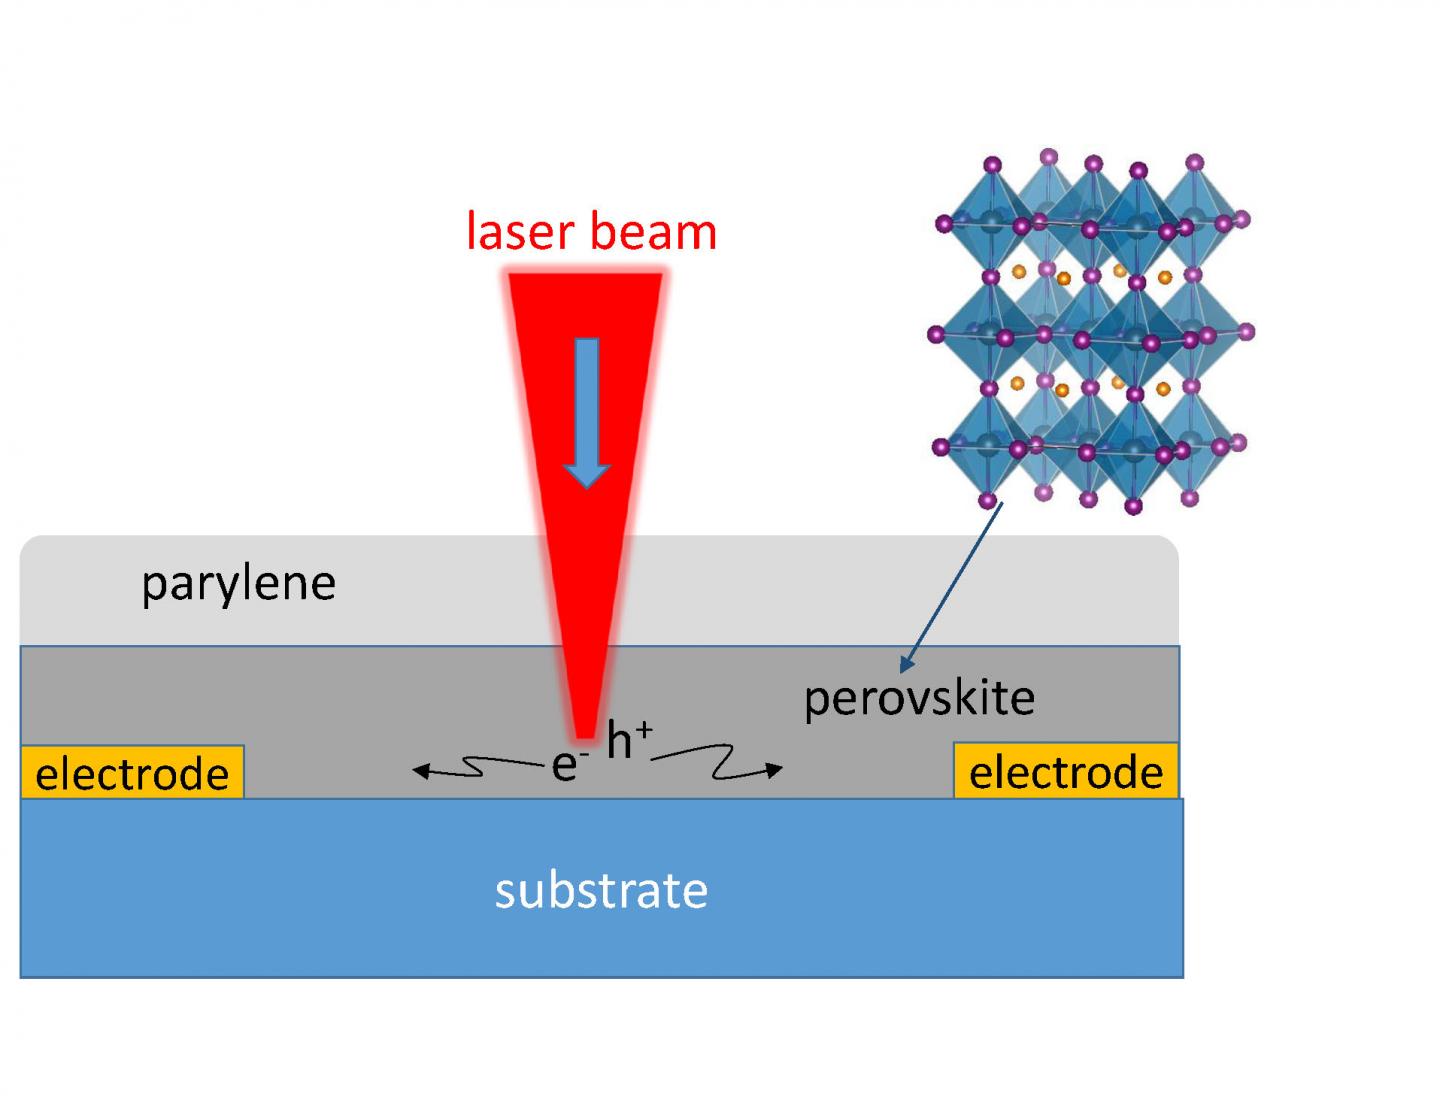 Scanning Photocurrent Imaging Microscopy Provided Direct Measurements of Perovskite Properties